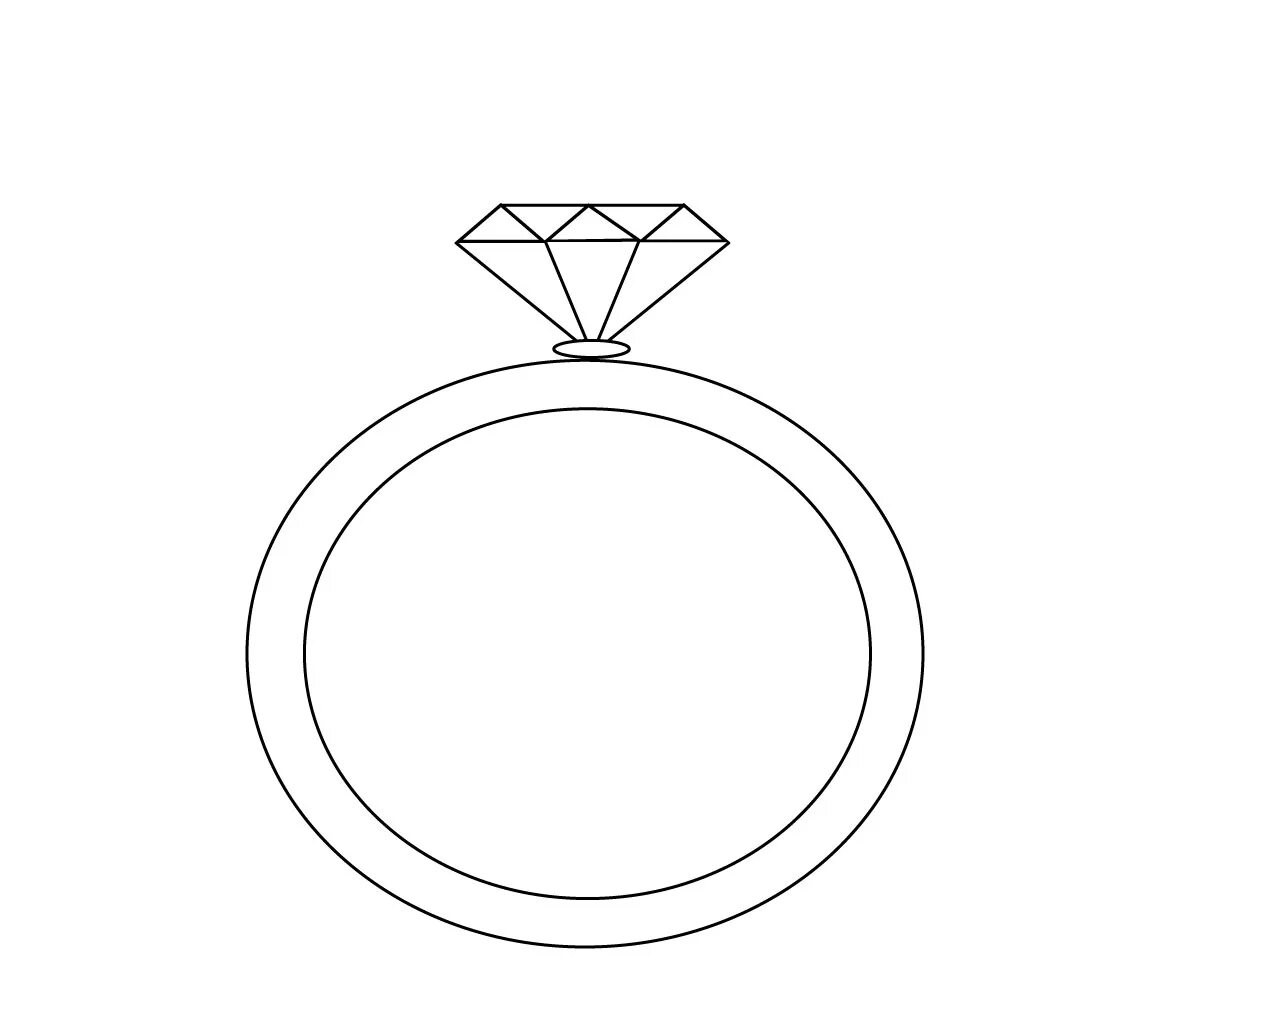 Coloring page of a stylish ring for students